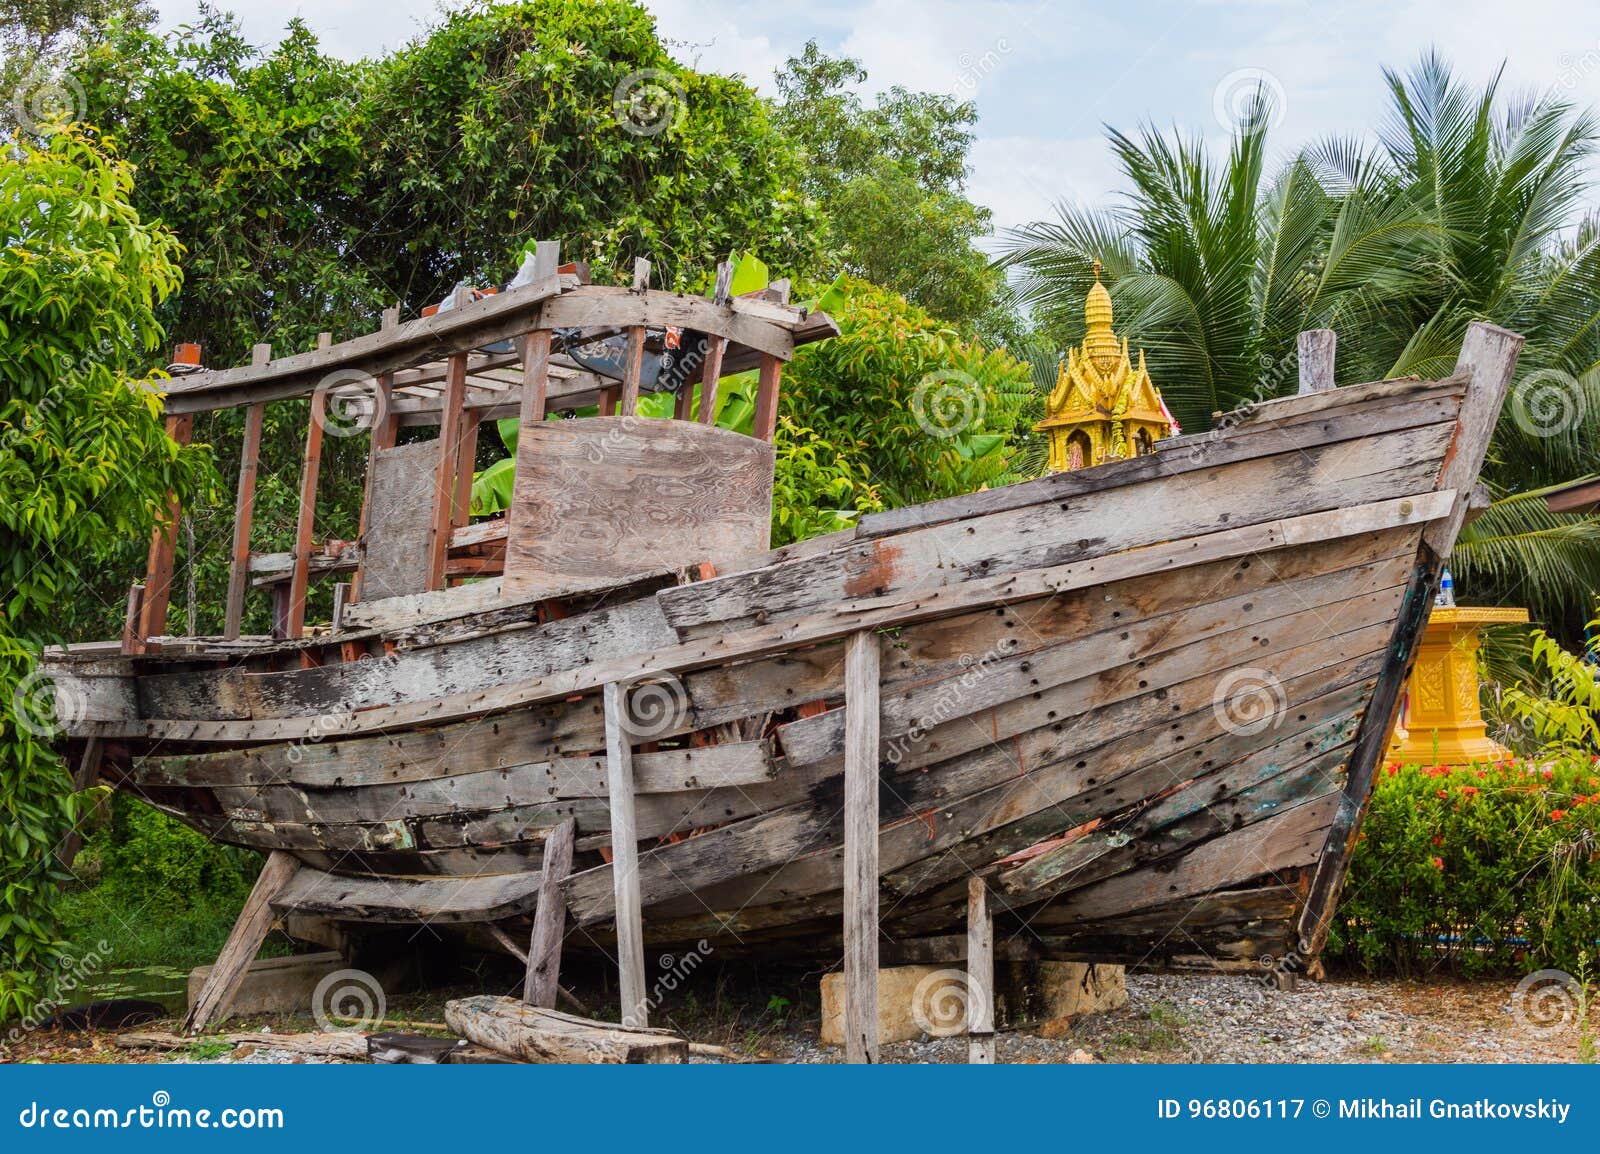 An Old Wooden Fishing Boat in Garden As Decoration Item Stock Image - Image  of coastal, scenery: 96806117